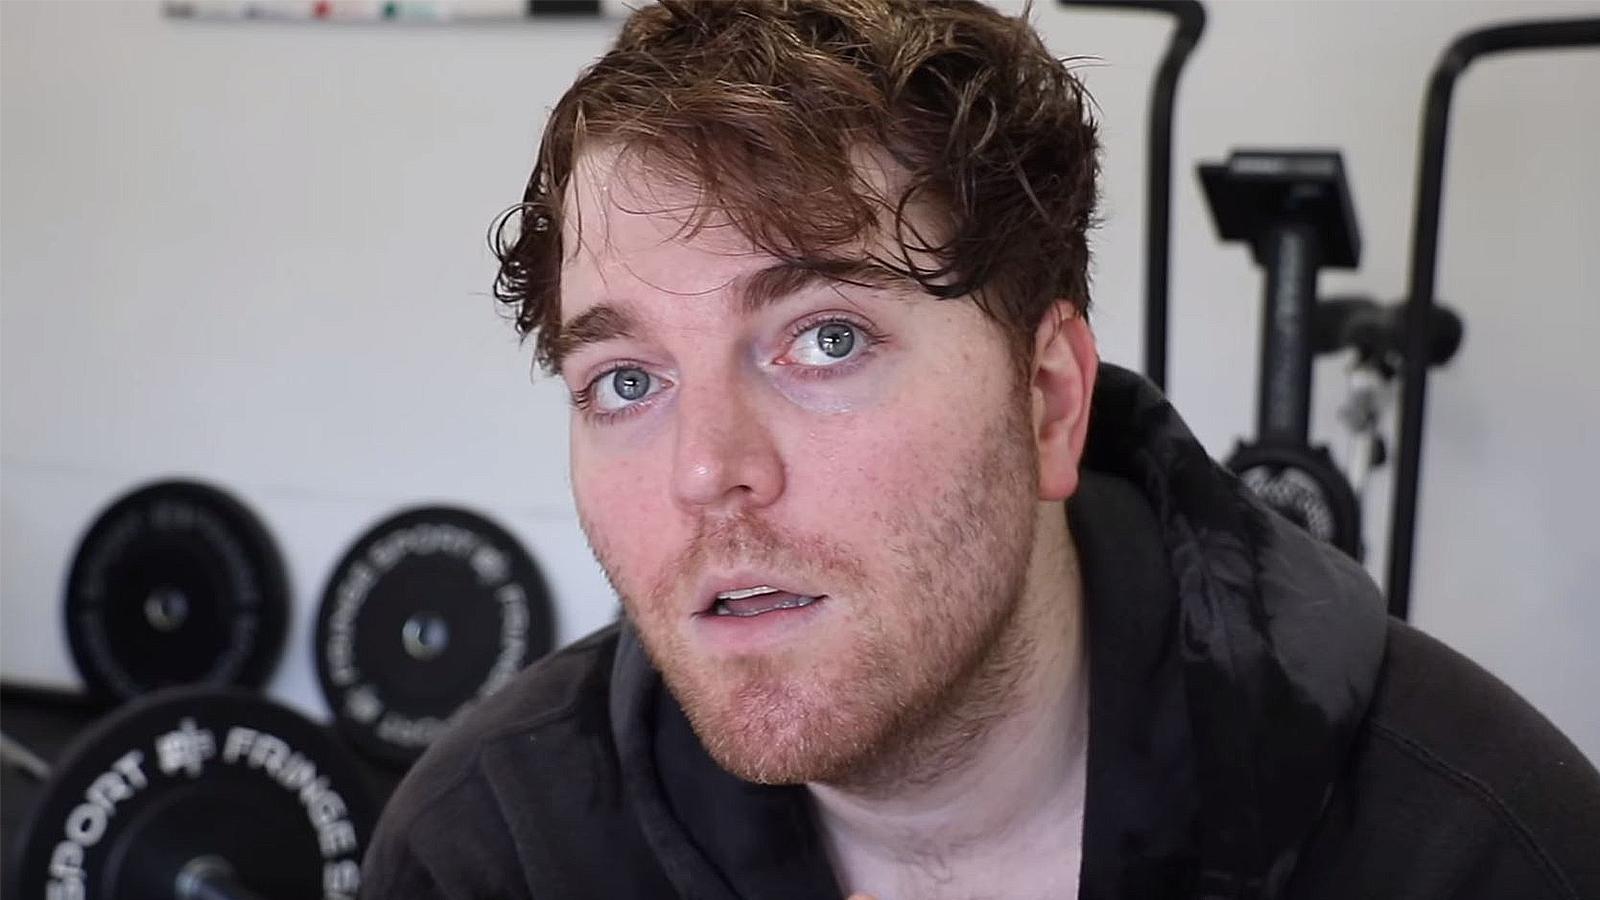 Shane Dawson is pictured during a workout.